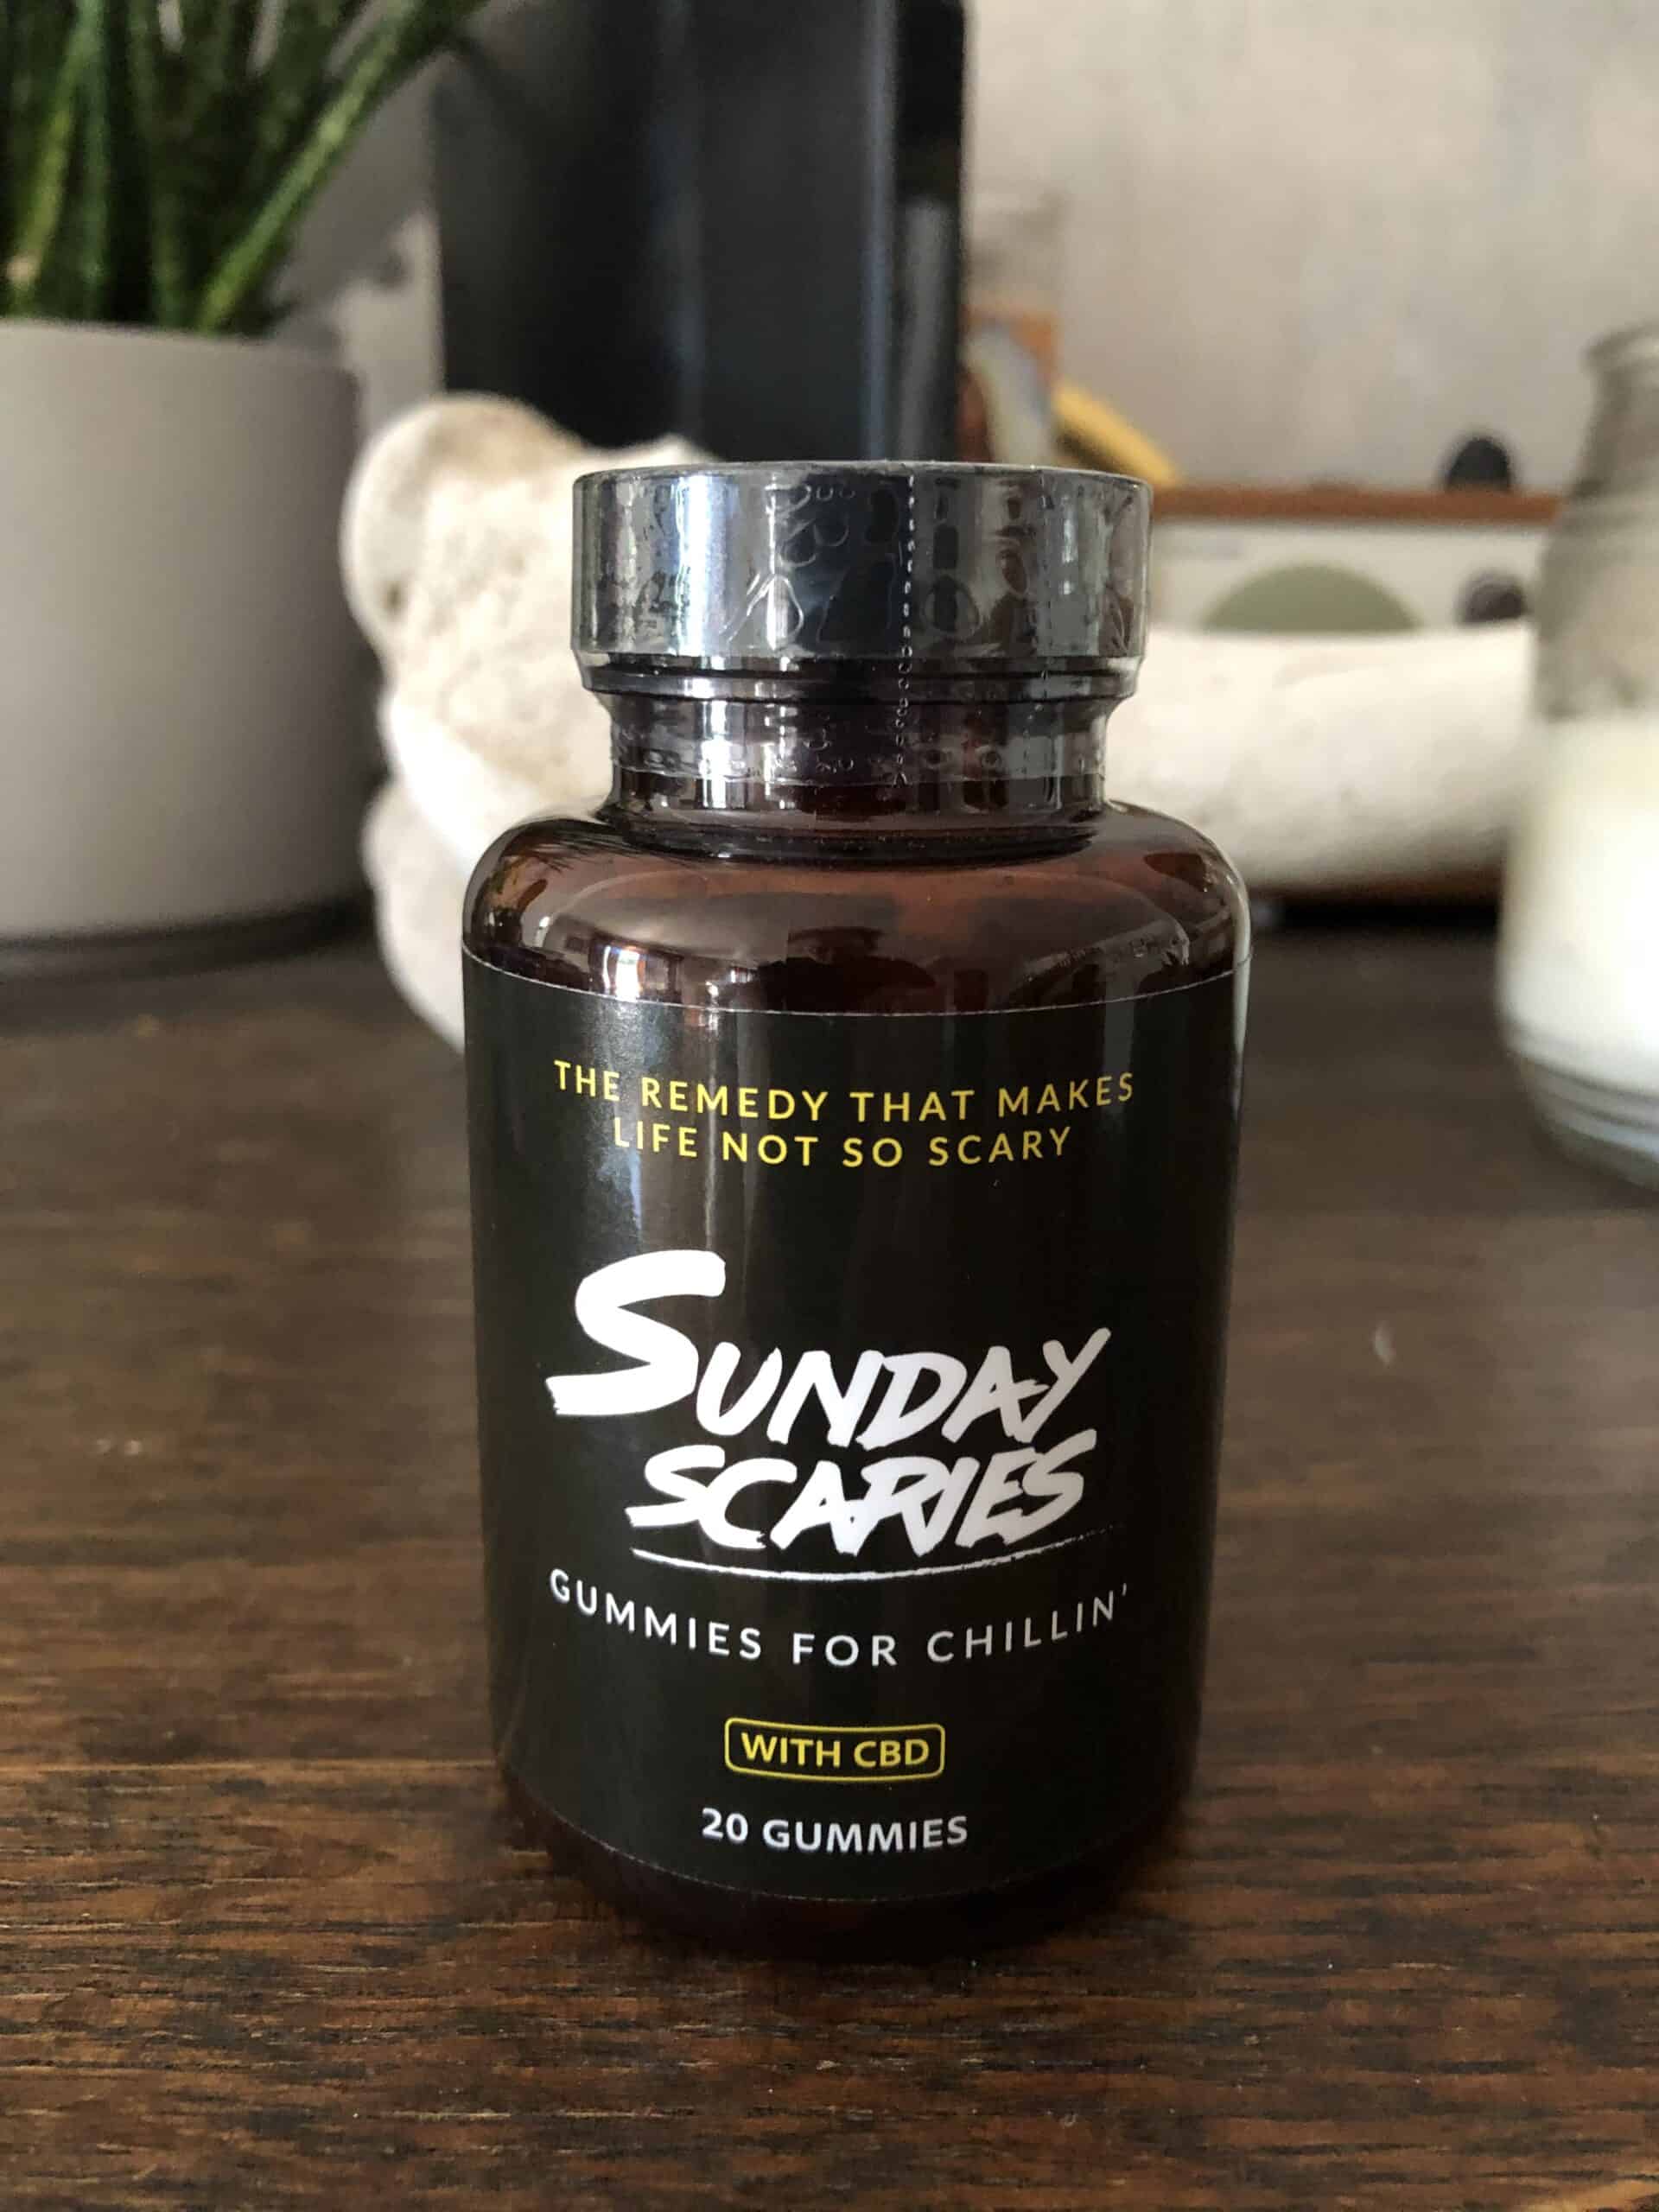 Sunday Scaries Gummies Save On Cannabis Review 